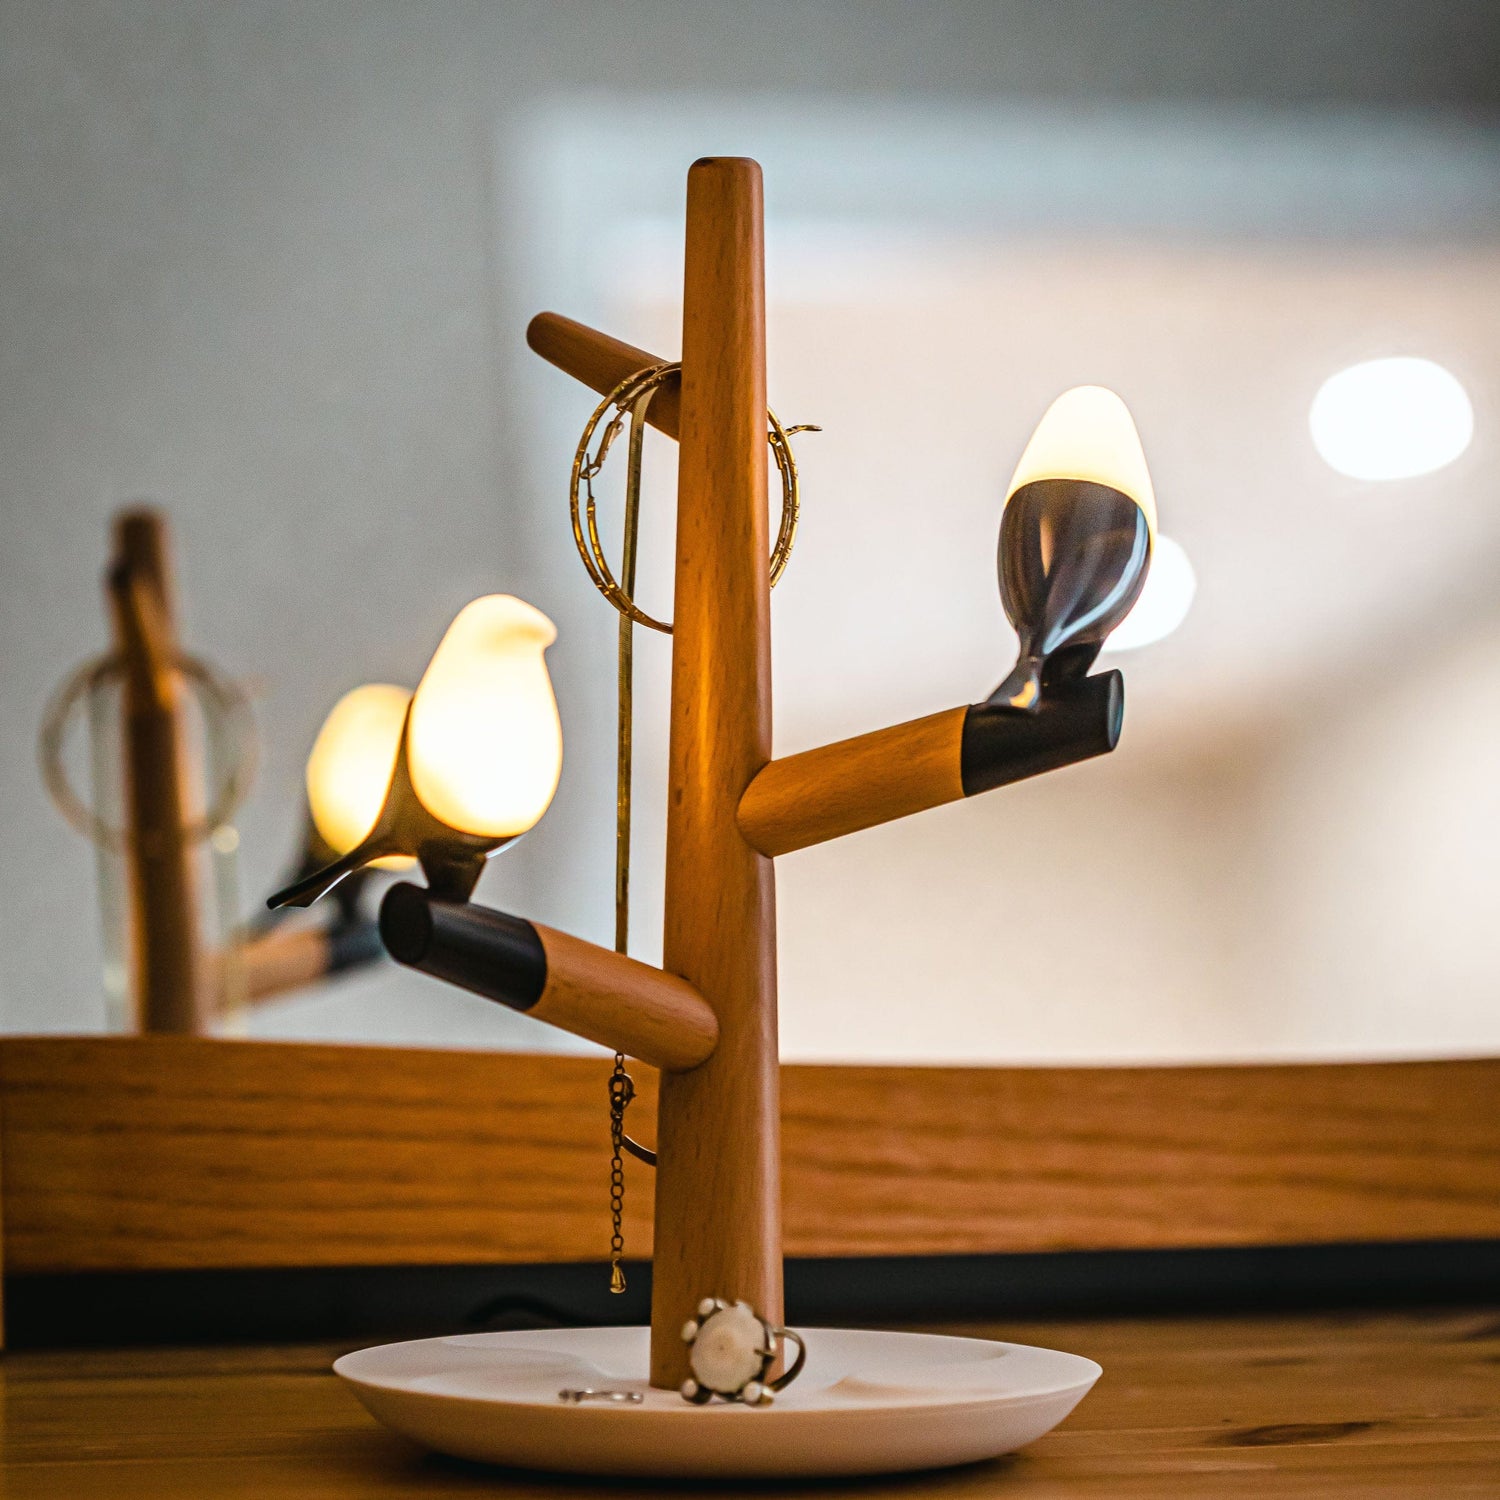 Cutesy Birds Desk Lamp with Wireless Charging - Table Lamp